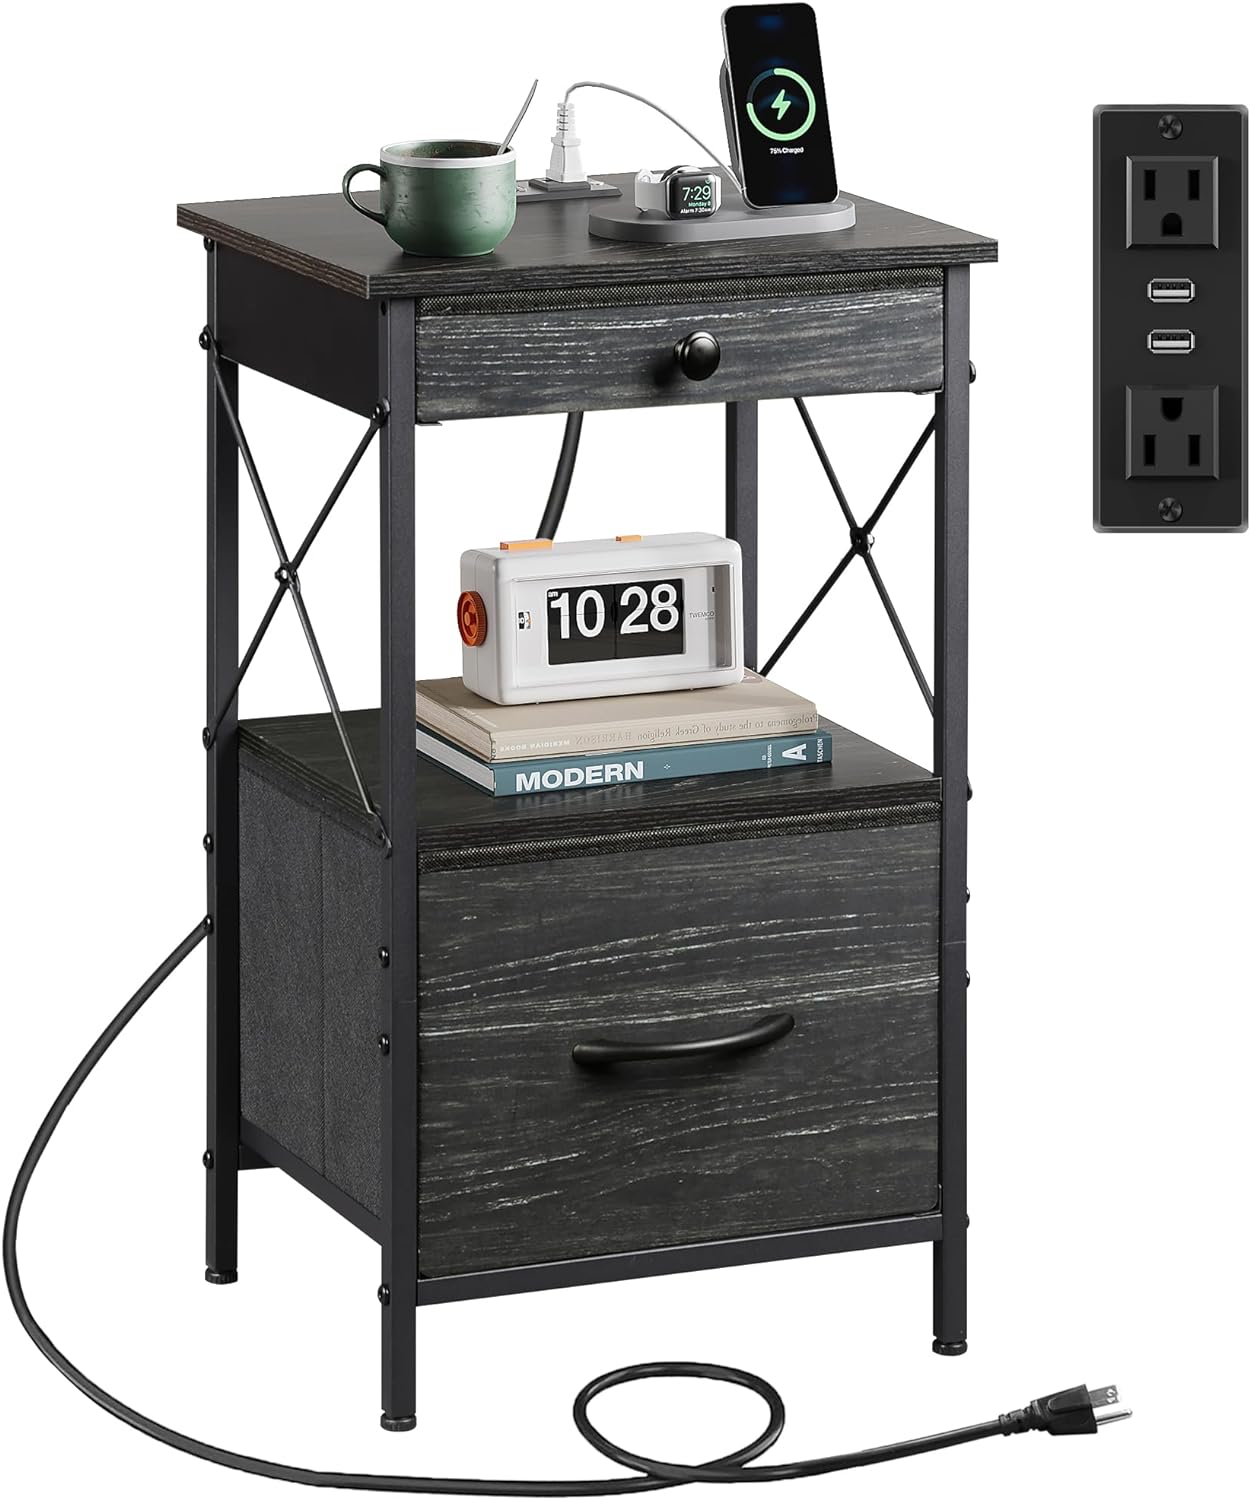 WLIVE Nightstand with Charging Station,End Table with USB Ports and Outlets,Small End Tables Living Room,Dresser and Nightstand Sets for Bedroom,Outlets,Basics,Small Spaces,Charcoal Black